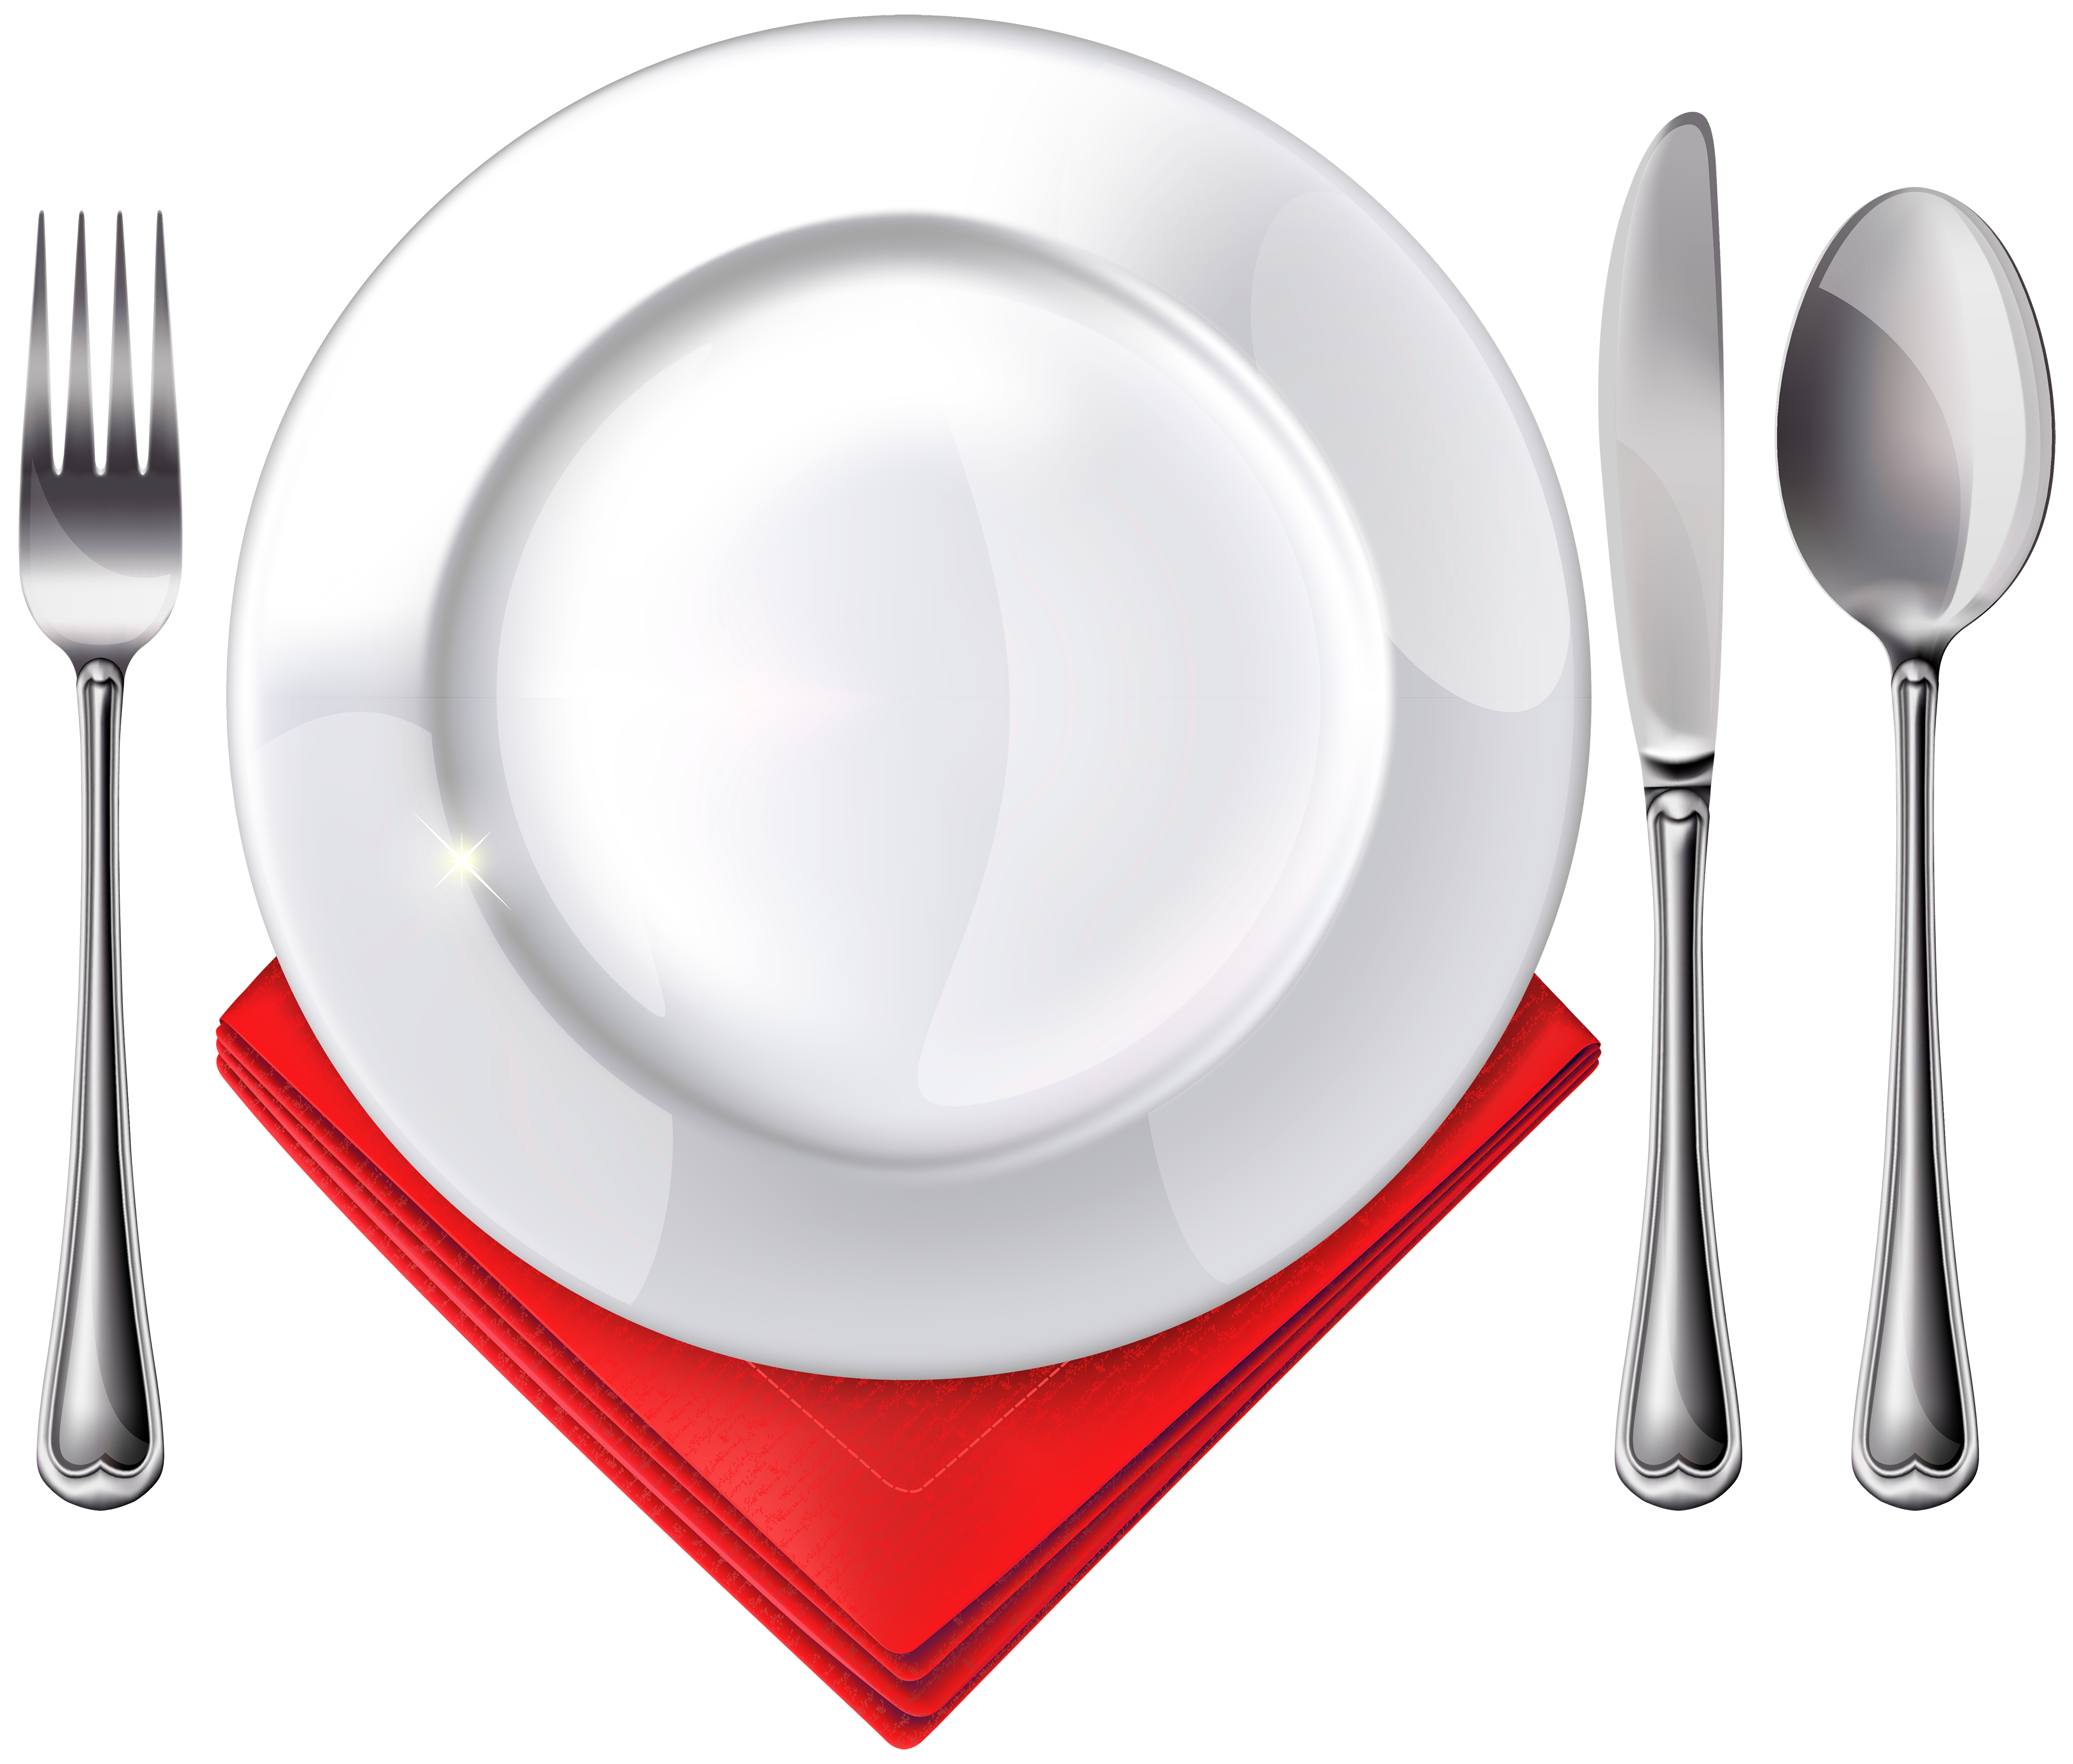  collection of fork. Dishes clipart plate silverware